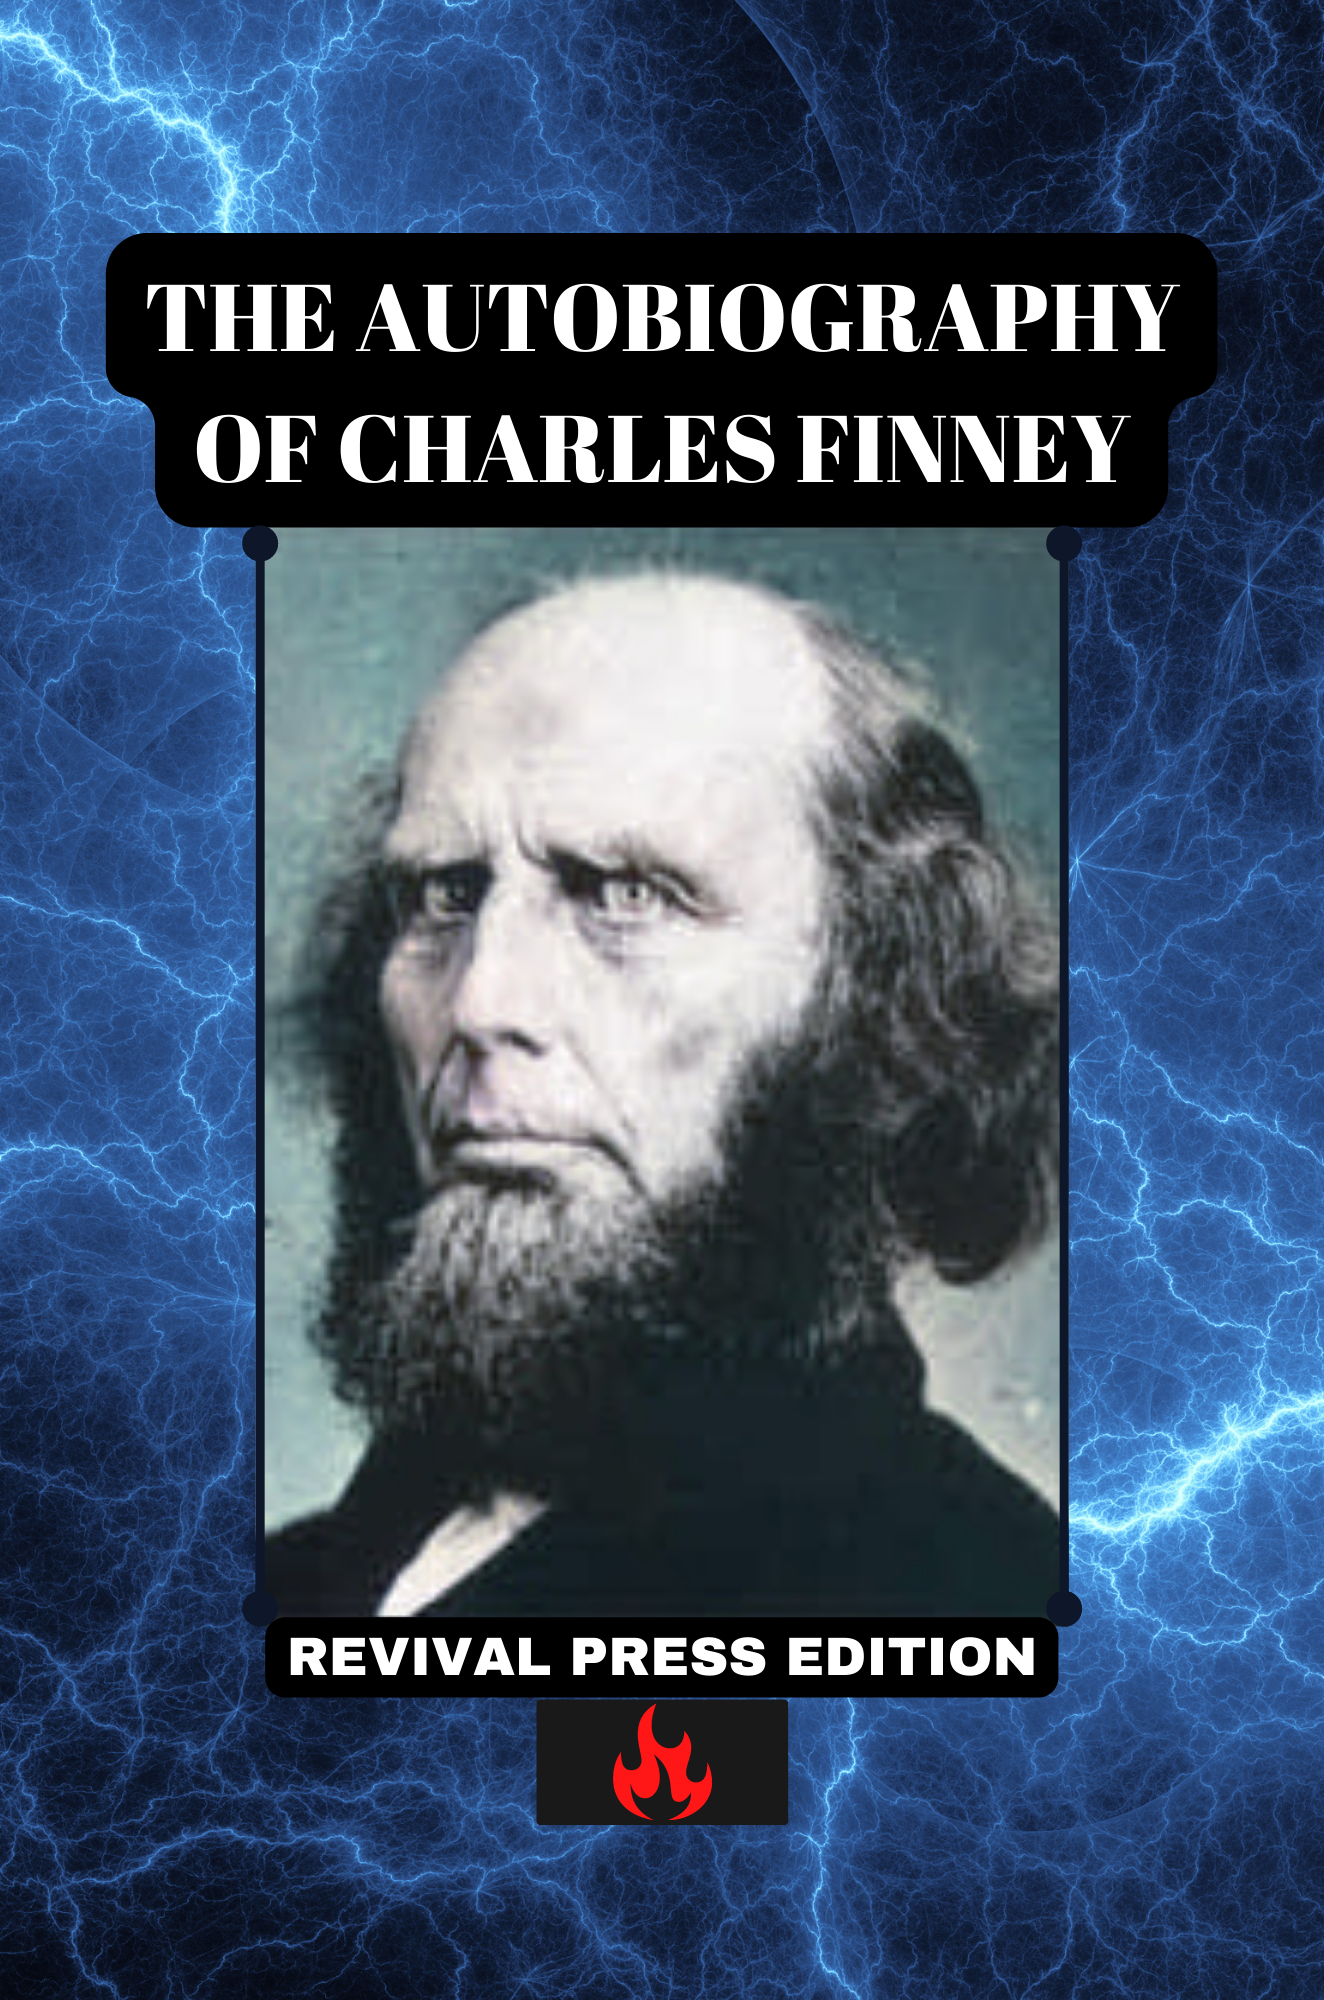 THE AUTOBIOGRAPHY OF CHARLES FINNEY (PAPERBACK OR HARDCOVER)